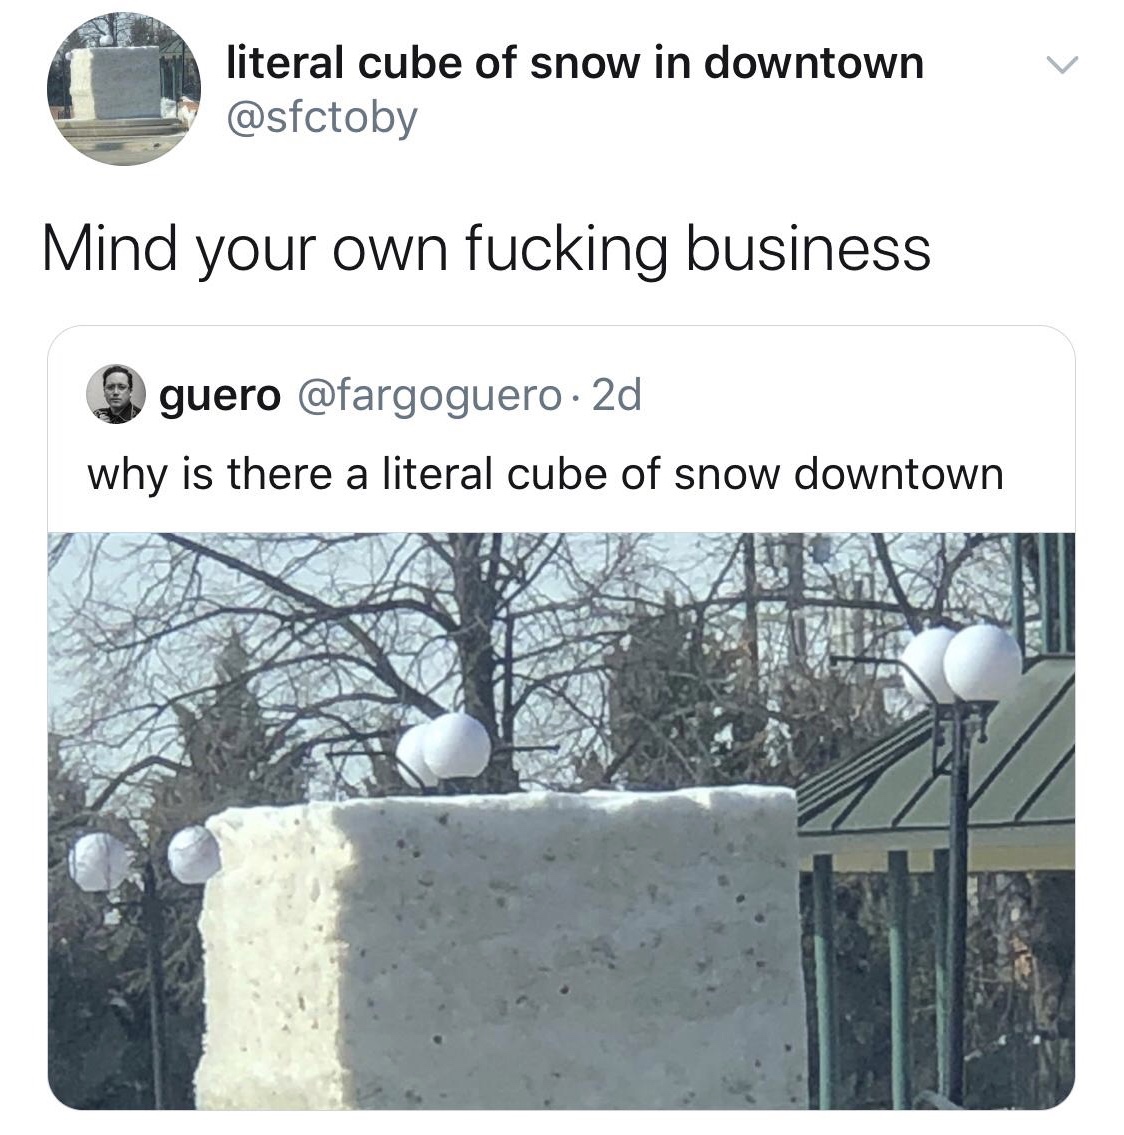 tree - literal cube of snow in downtown Mind your own fucking business guero 2d why is there a literal cube of snow downtown